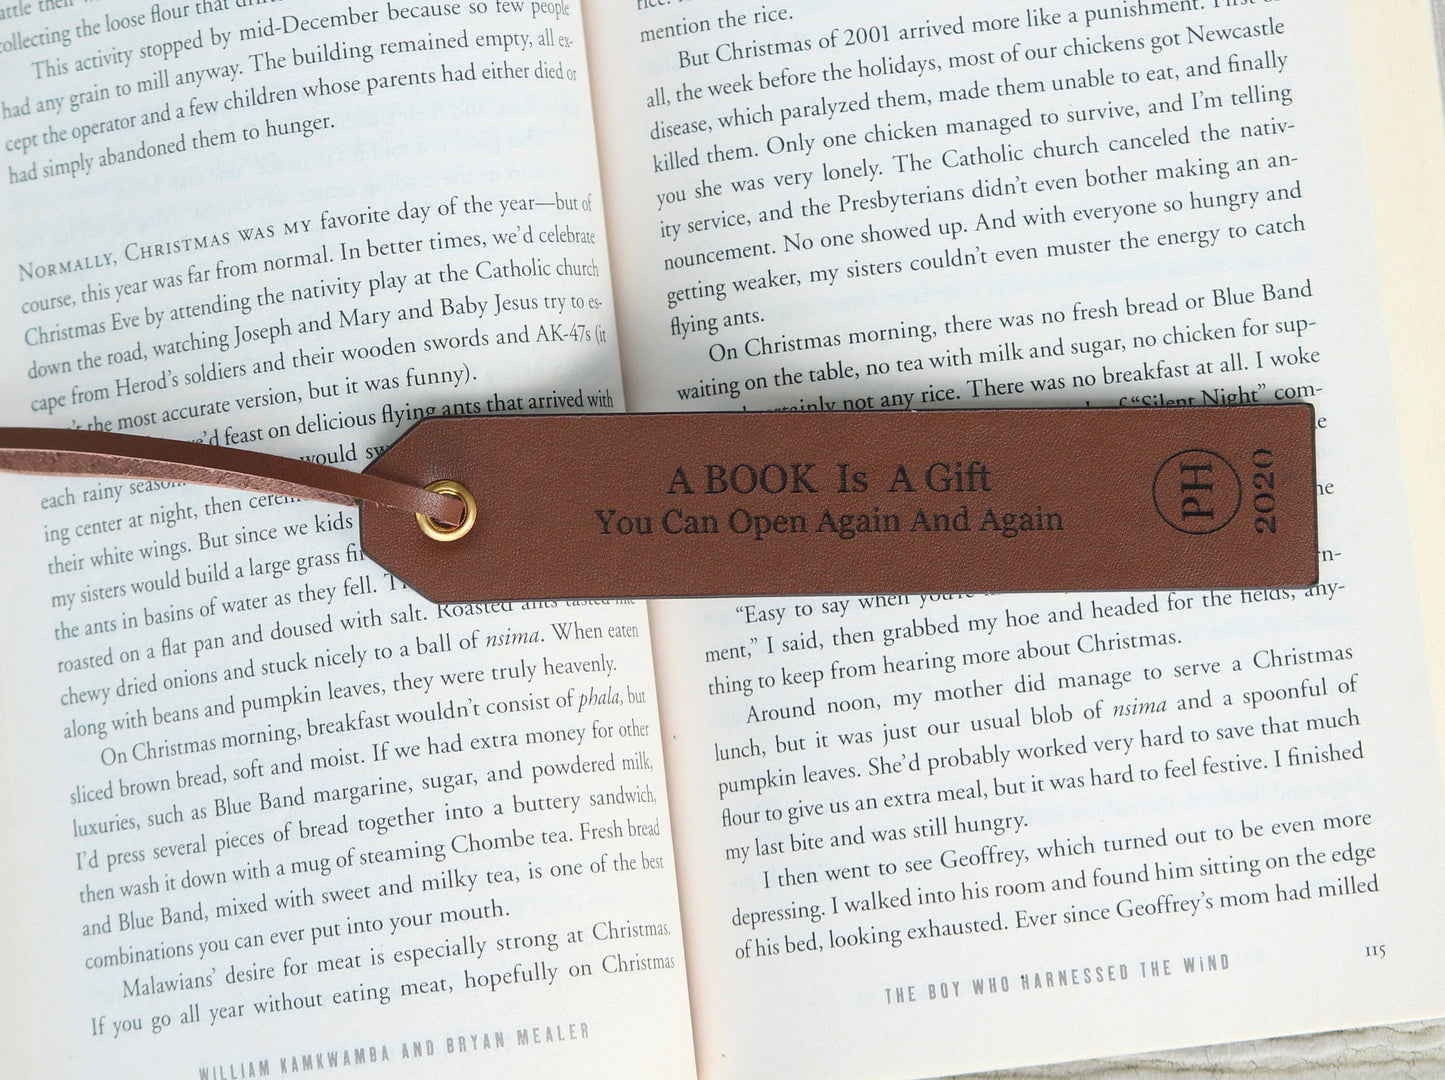 Personalized Leather Bookmark, Customized Gift, Book Lover, Gift for Readers - Birthday, Anniversary, Mother's Day, Father's Day Gift